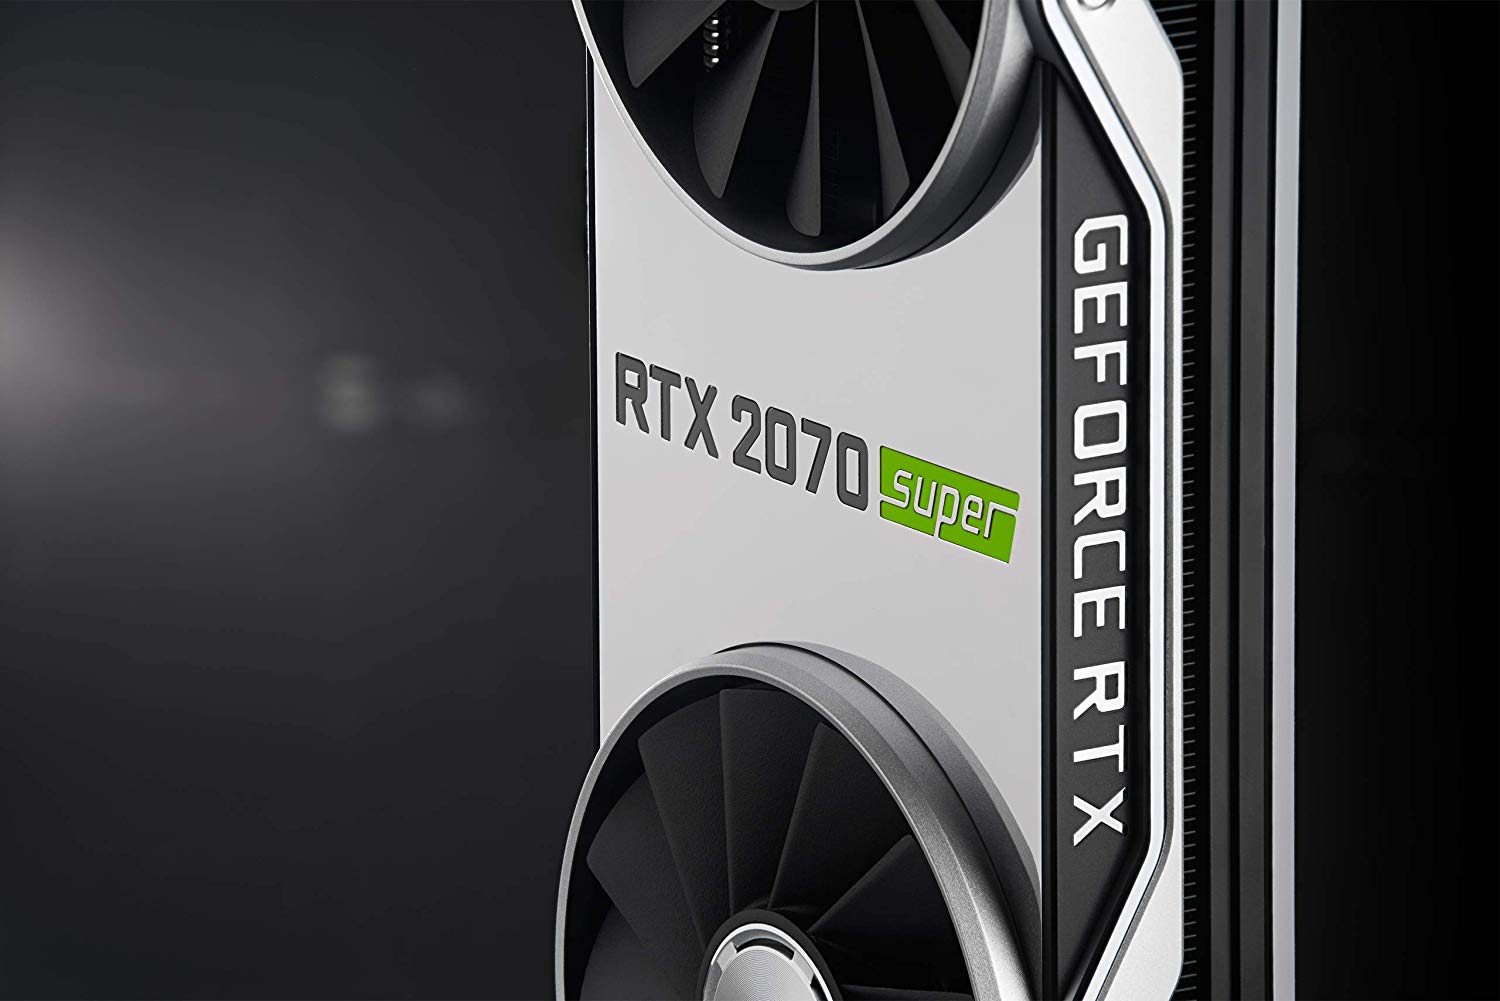 Nvidia RTX 2070 Super Founder's Edition review Striking the perfect